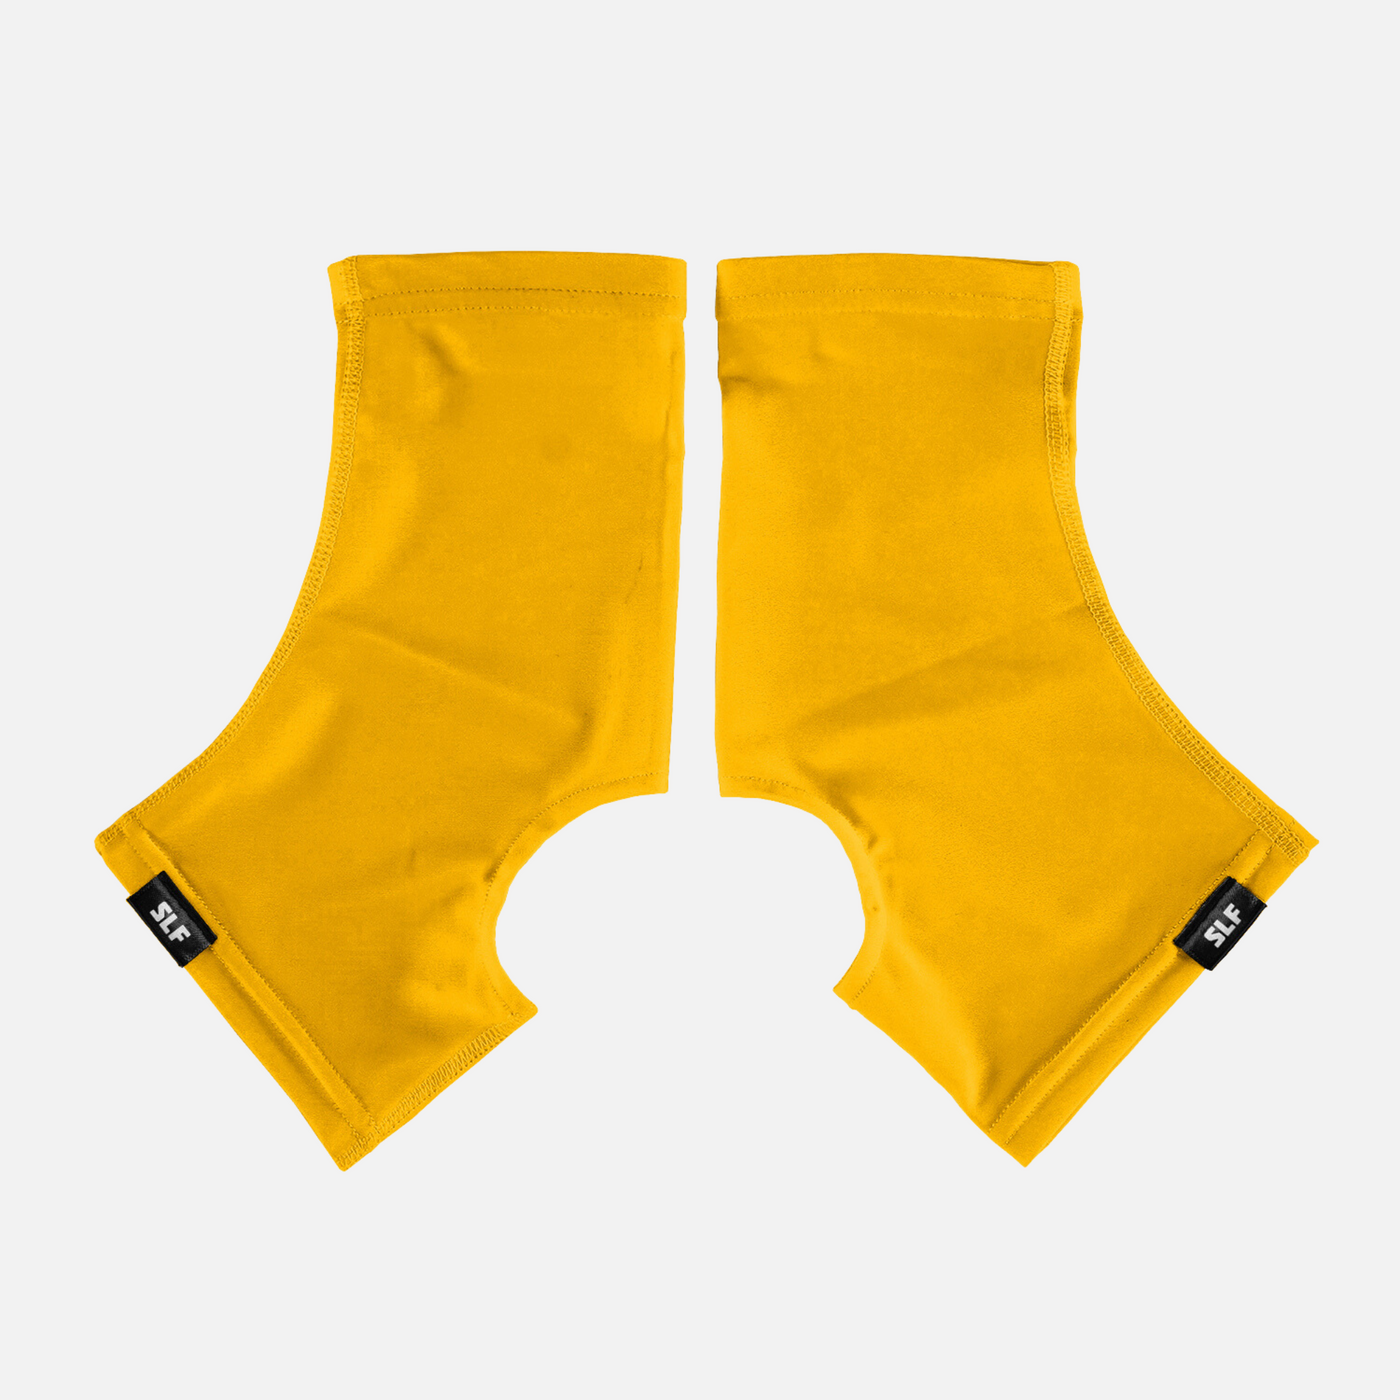 Hue Yellow Gold Spats / Cleat Covers